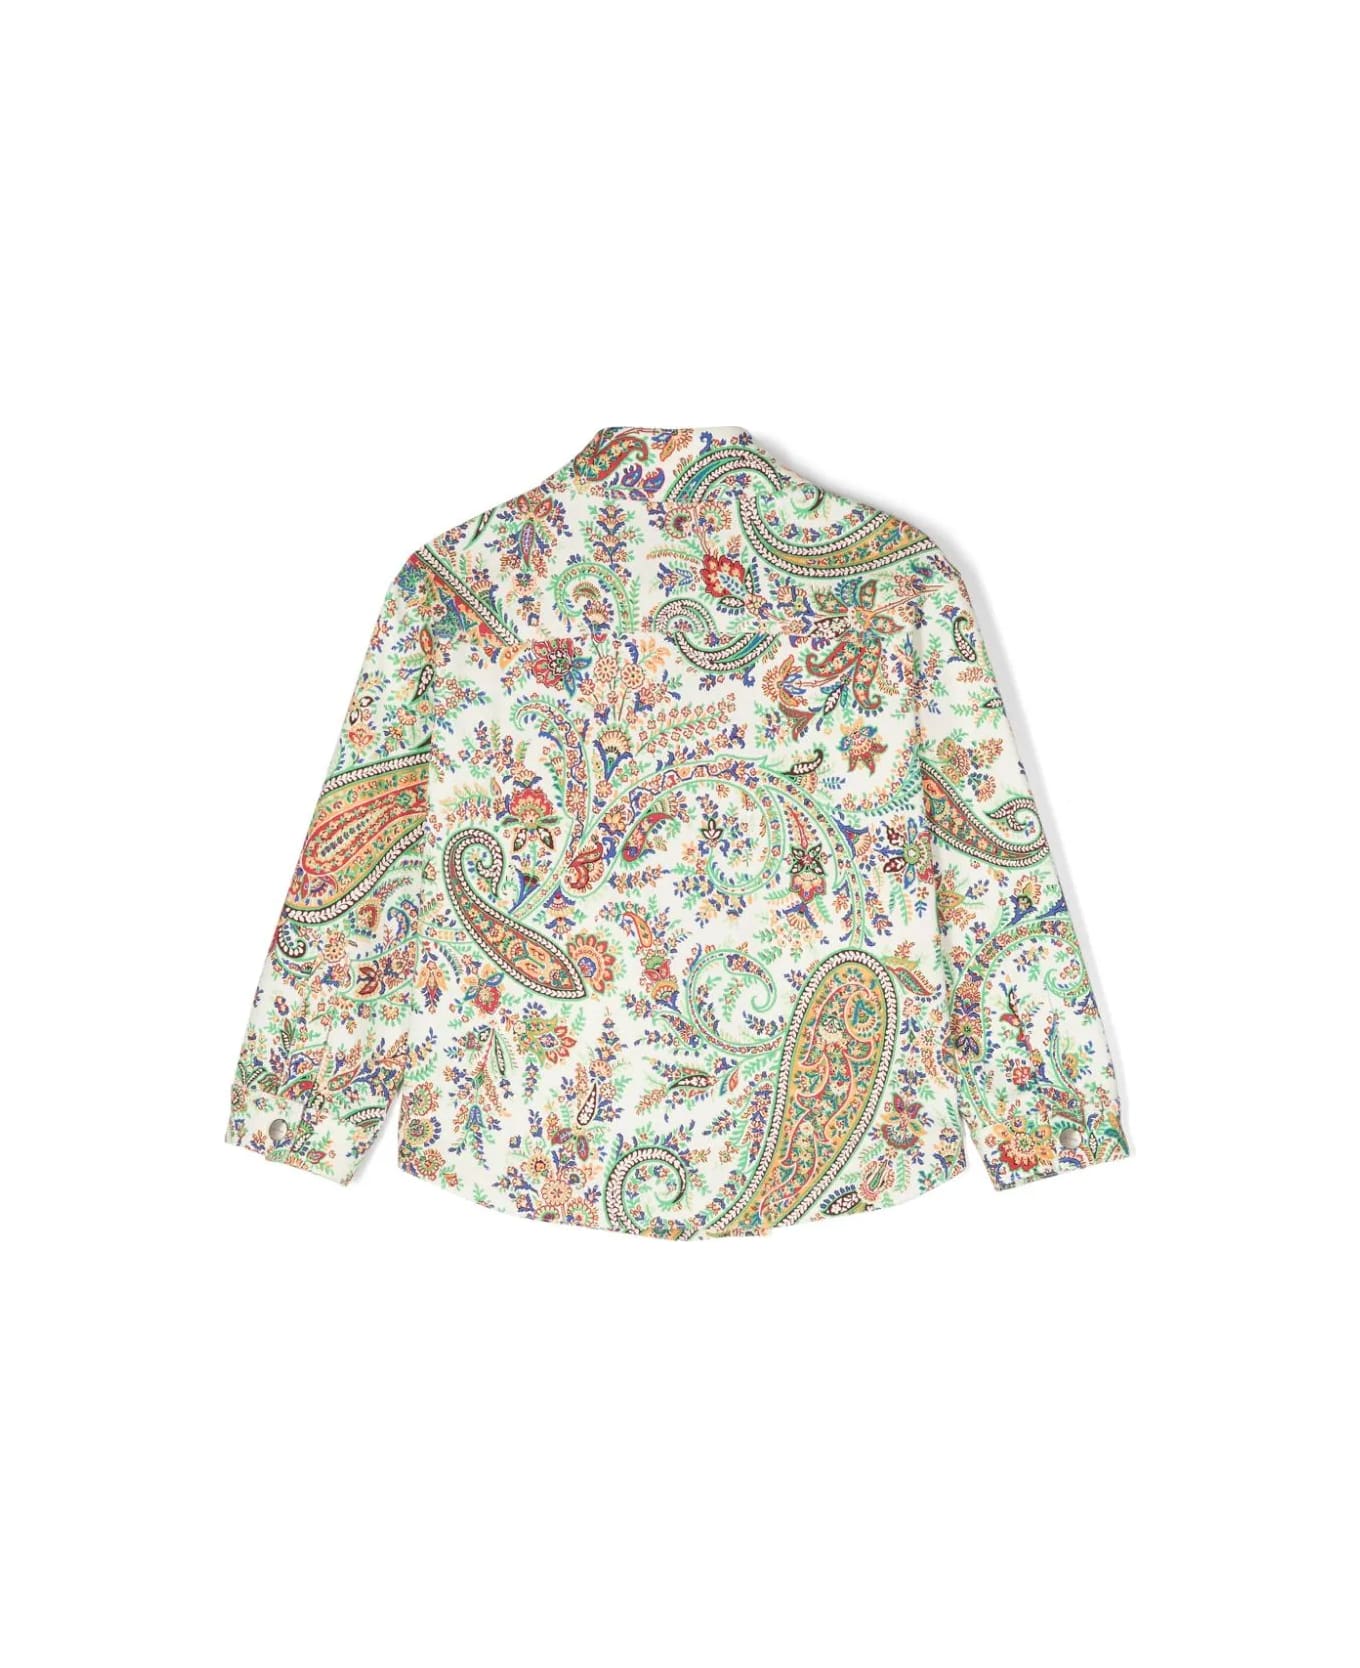 Etro Giacca Denim Con Stampa Paisley - ivory/colourful コート＆ジャケット